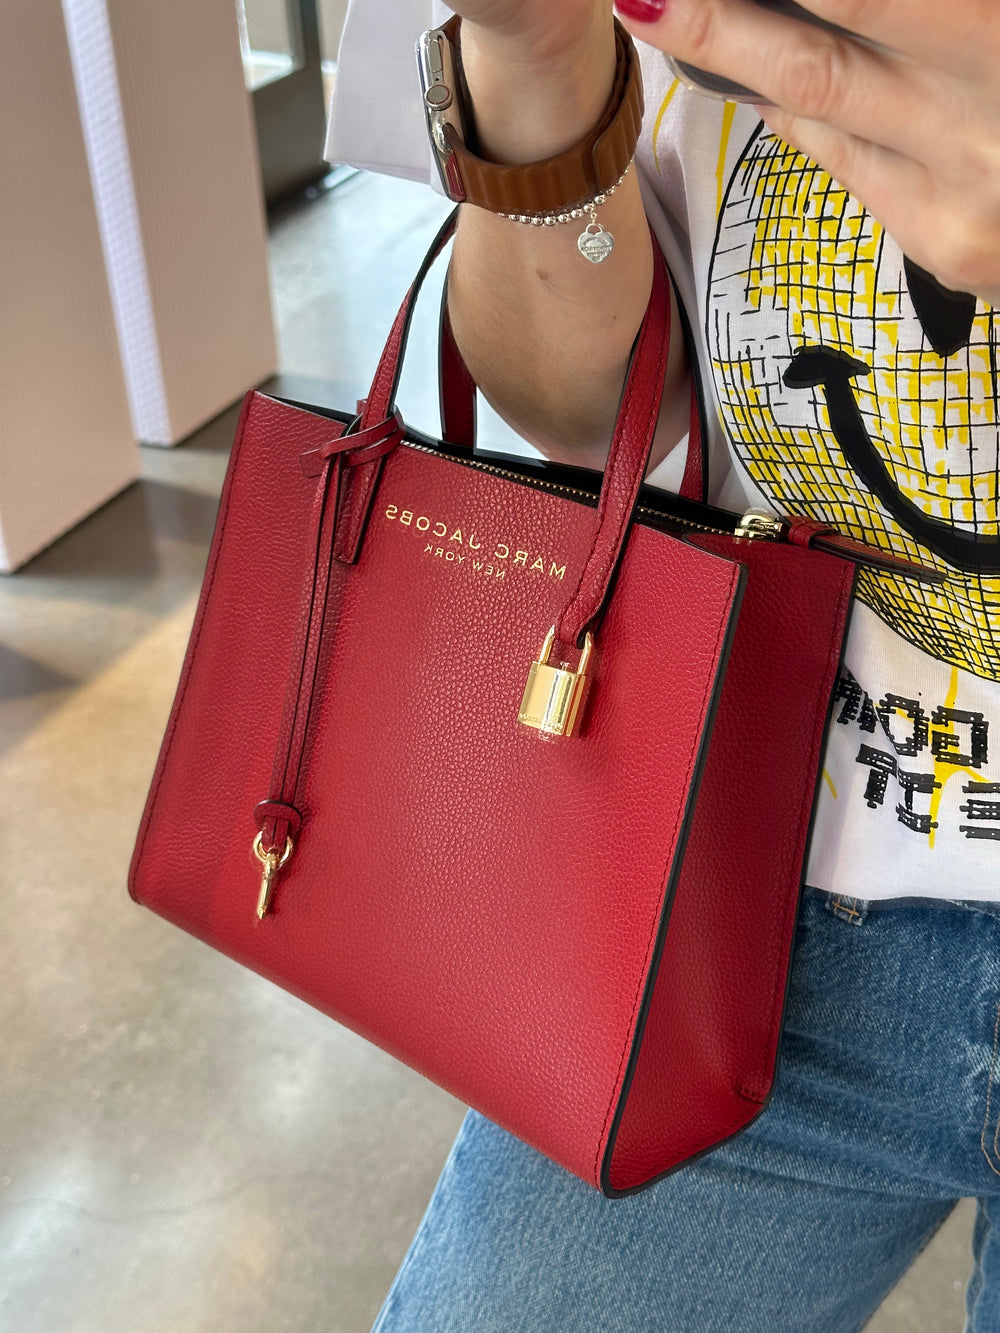 The Tote Bag Marc Jacobs  Red Mini Leather Tote Bag Review 